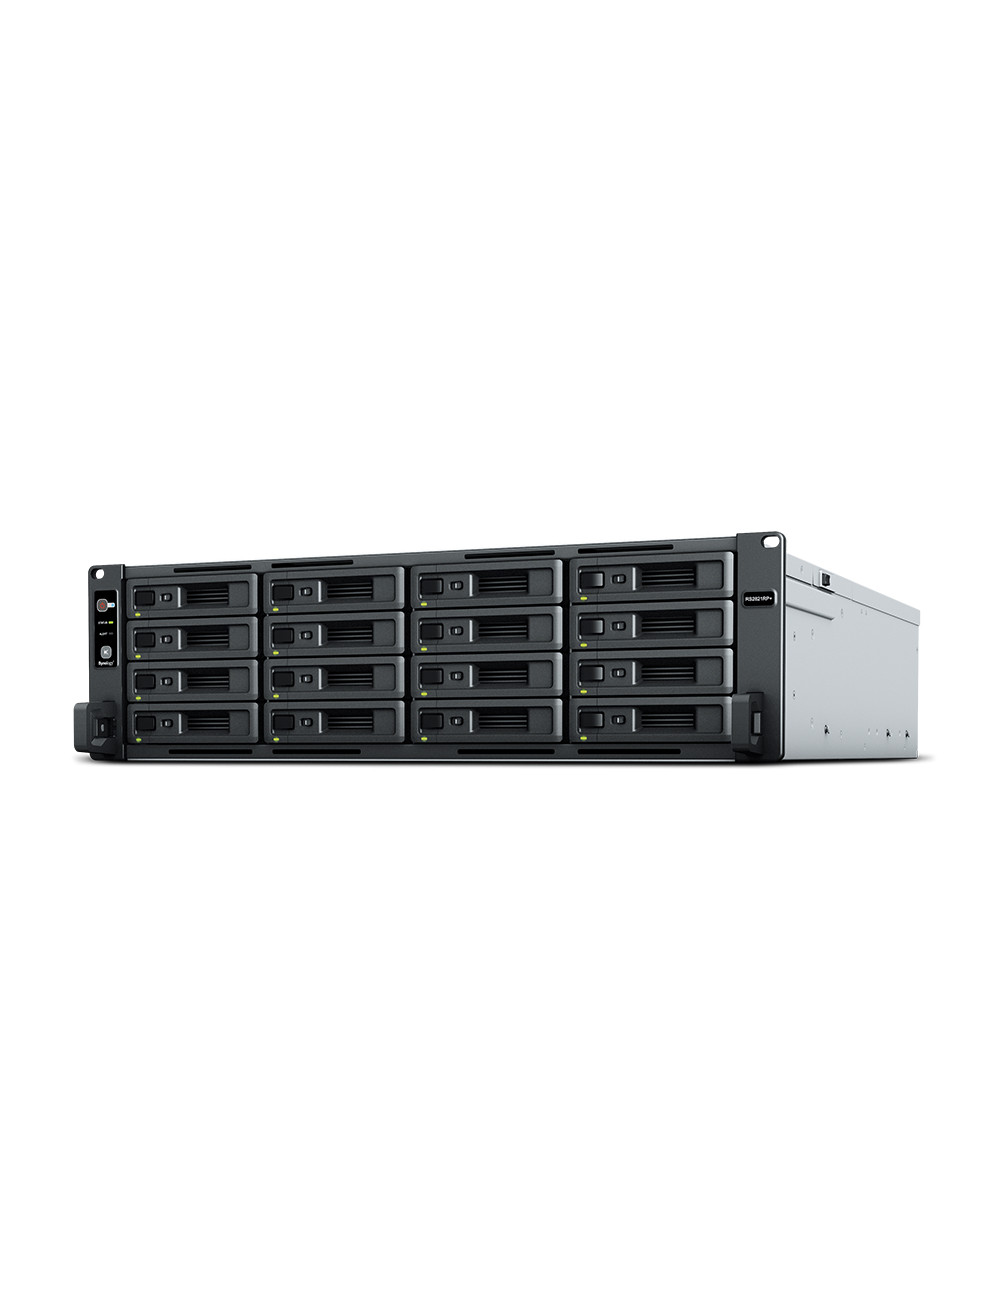 Synology | Rack NAS | RS2821RP+ | Up to 16 HDD/SSD Hot-Swap | AMD Ryzen | Ryzen V1500B Quad Core | Processor frequency 2.2 GHz |